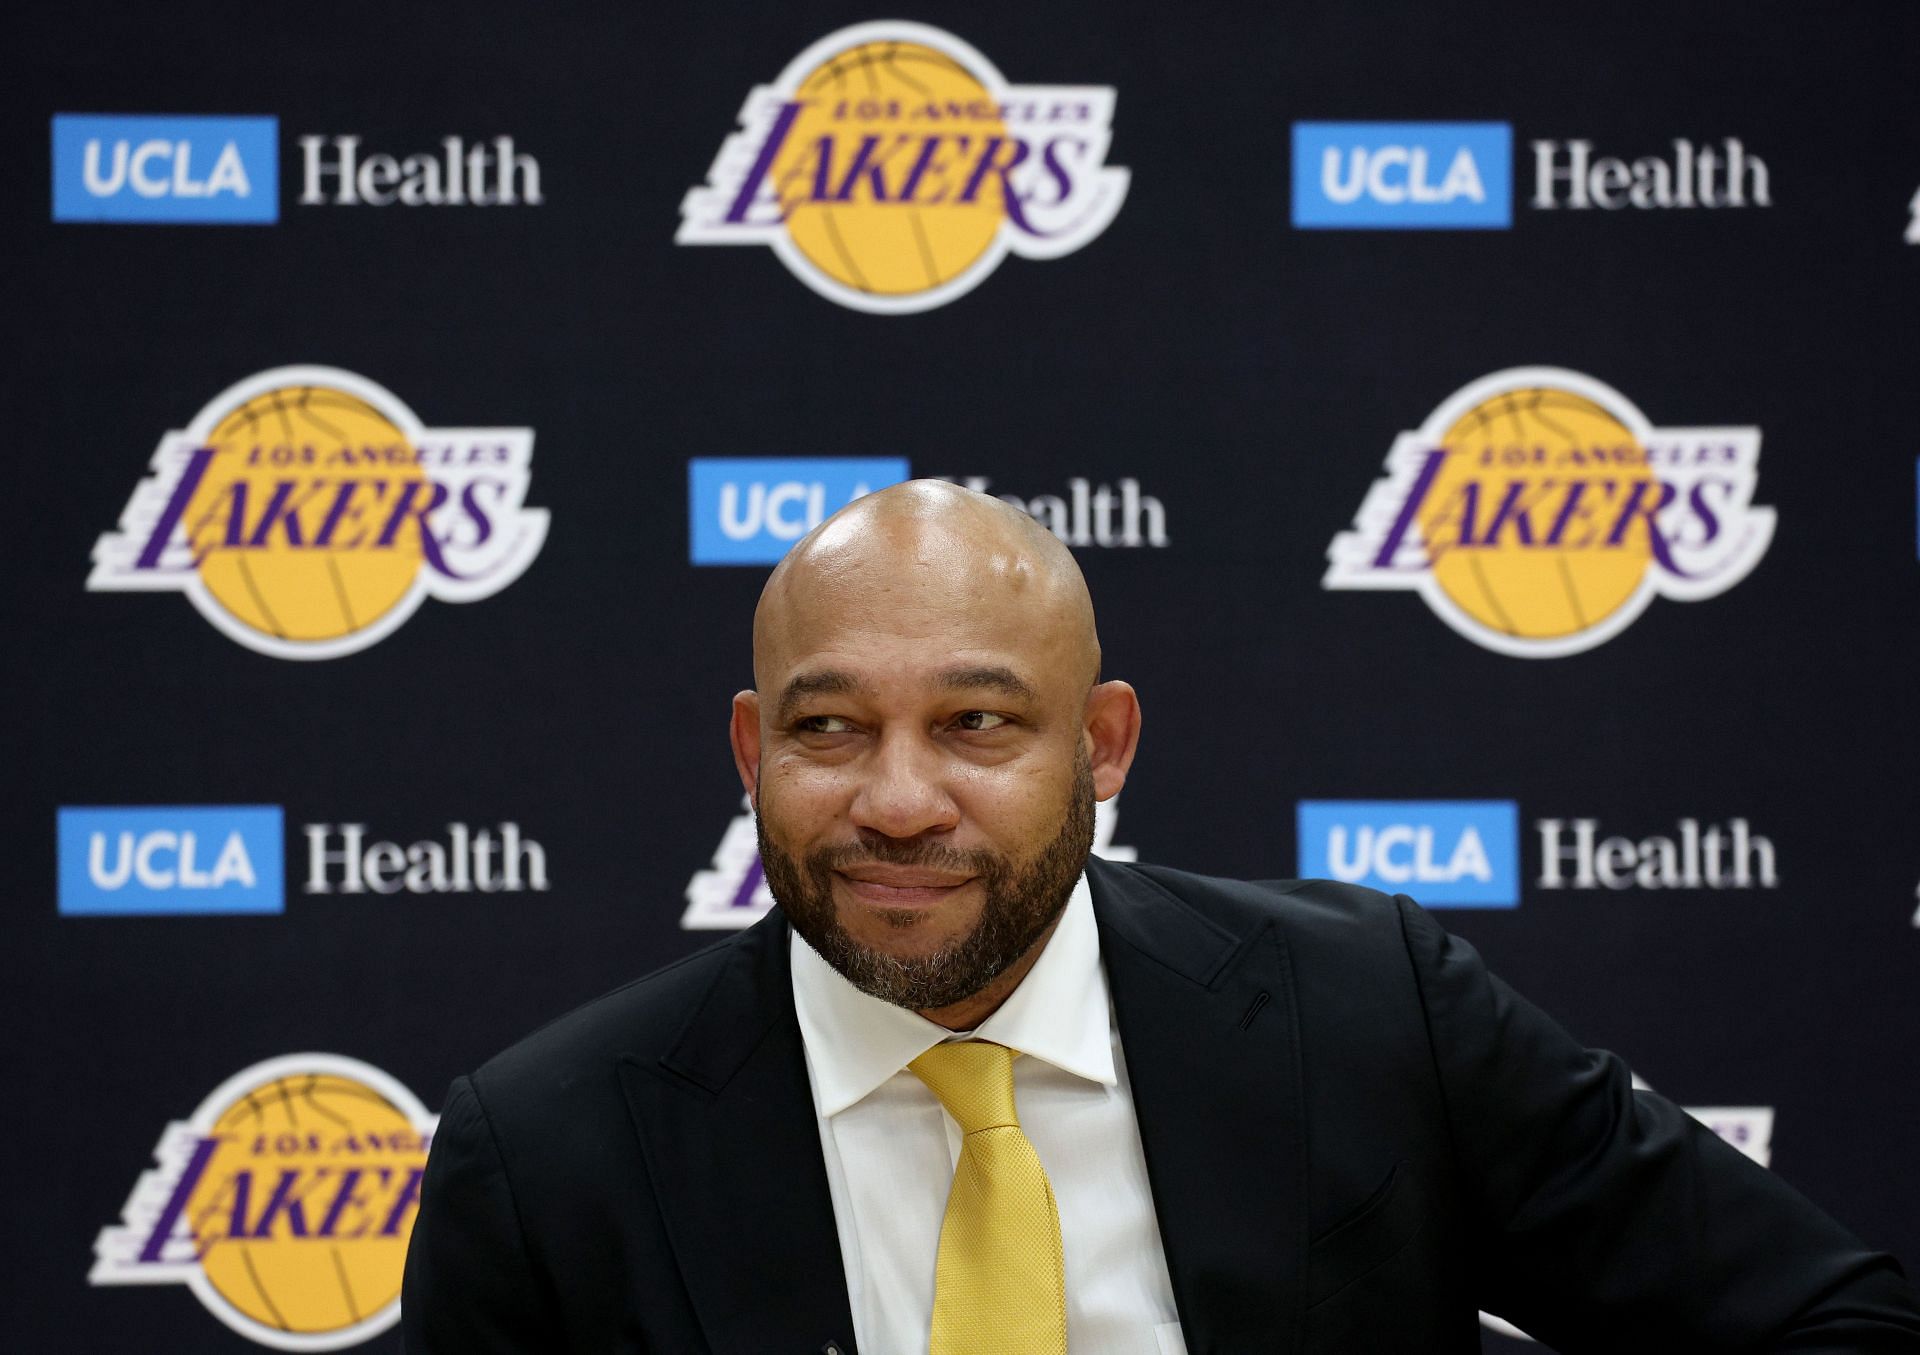 New LA Lakers coach Darvin Ham speaks during a news conference on June 6 in El Segundo, California.